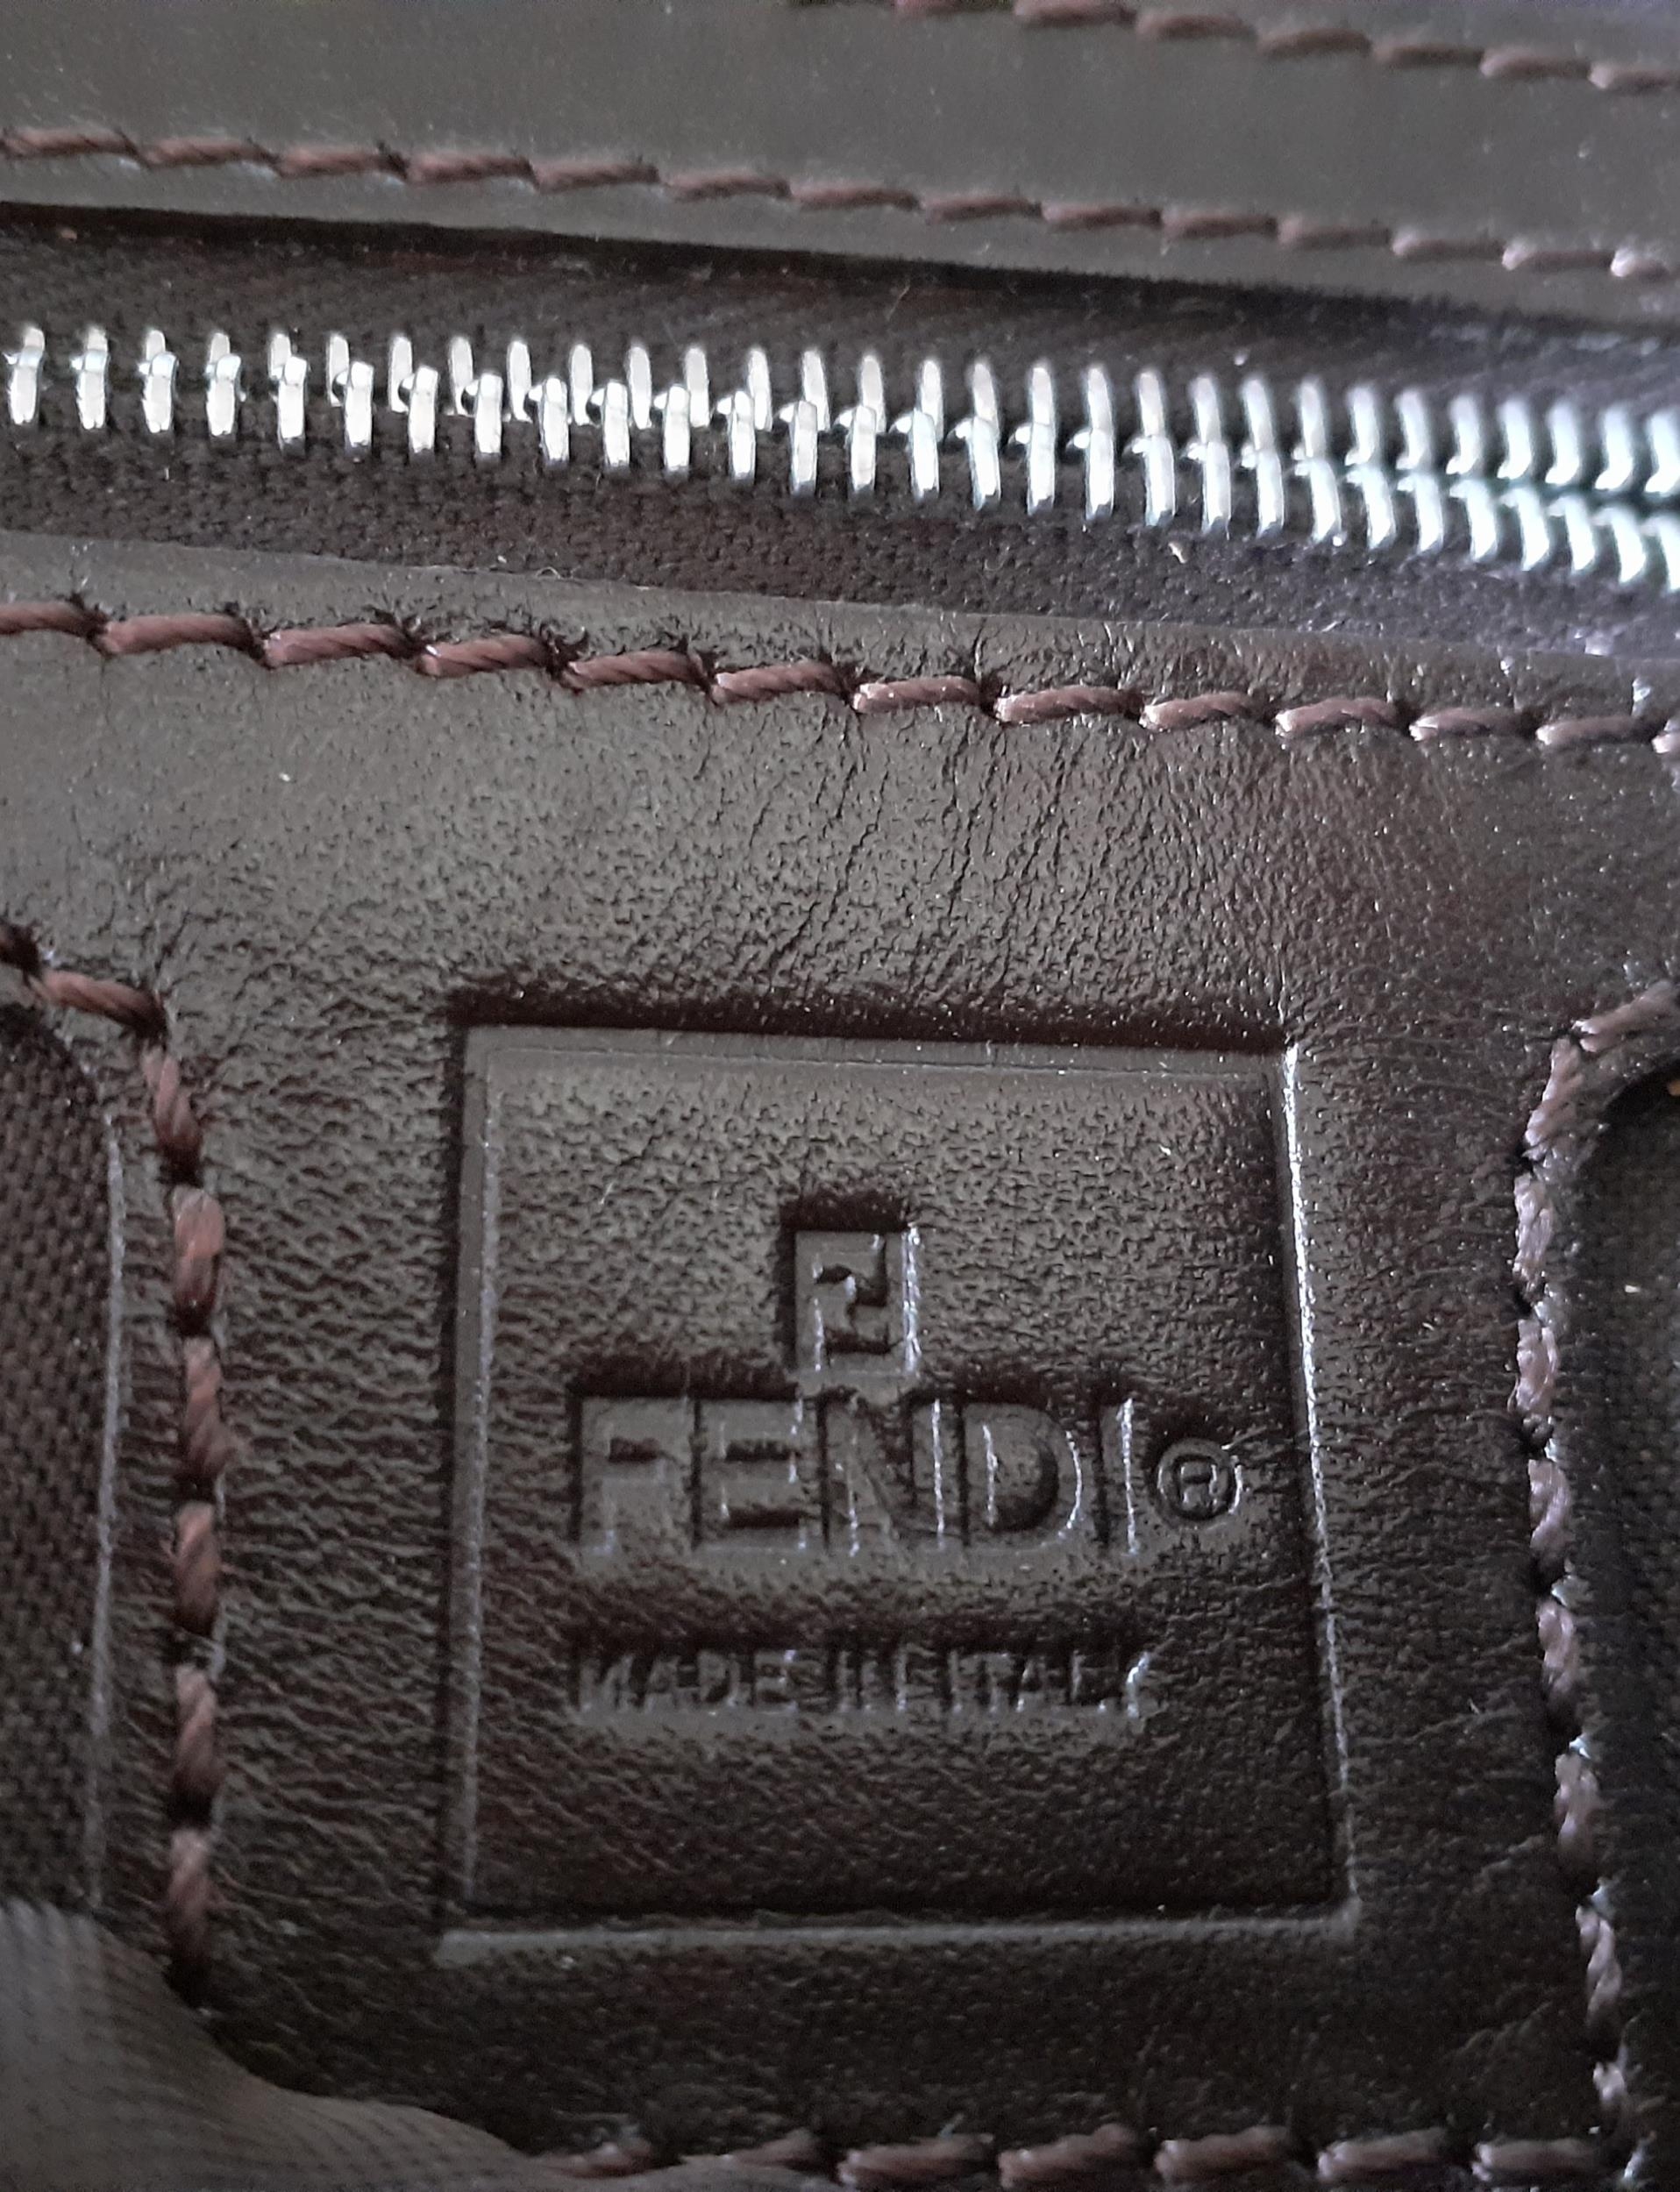 Fendi-A 1990's/2000's Zucca Baguette shoulder bag in brown leather with silver tone hardware and - Image 7 of 8